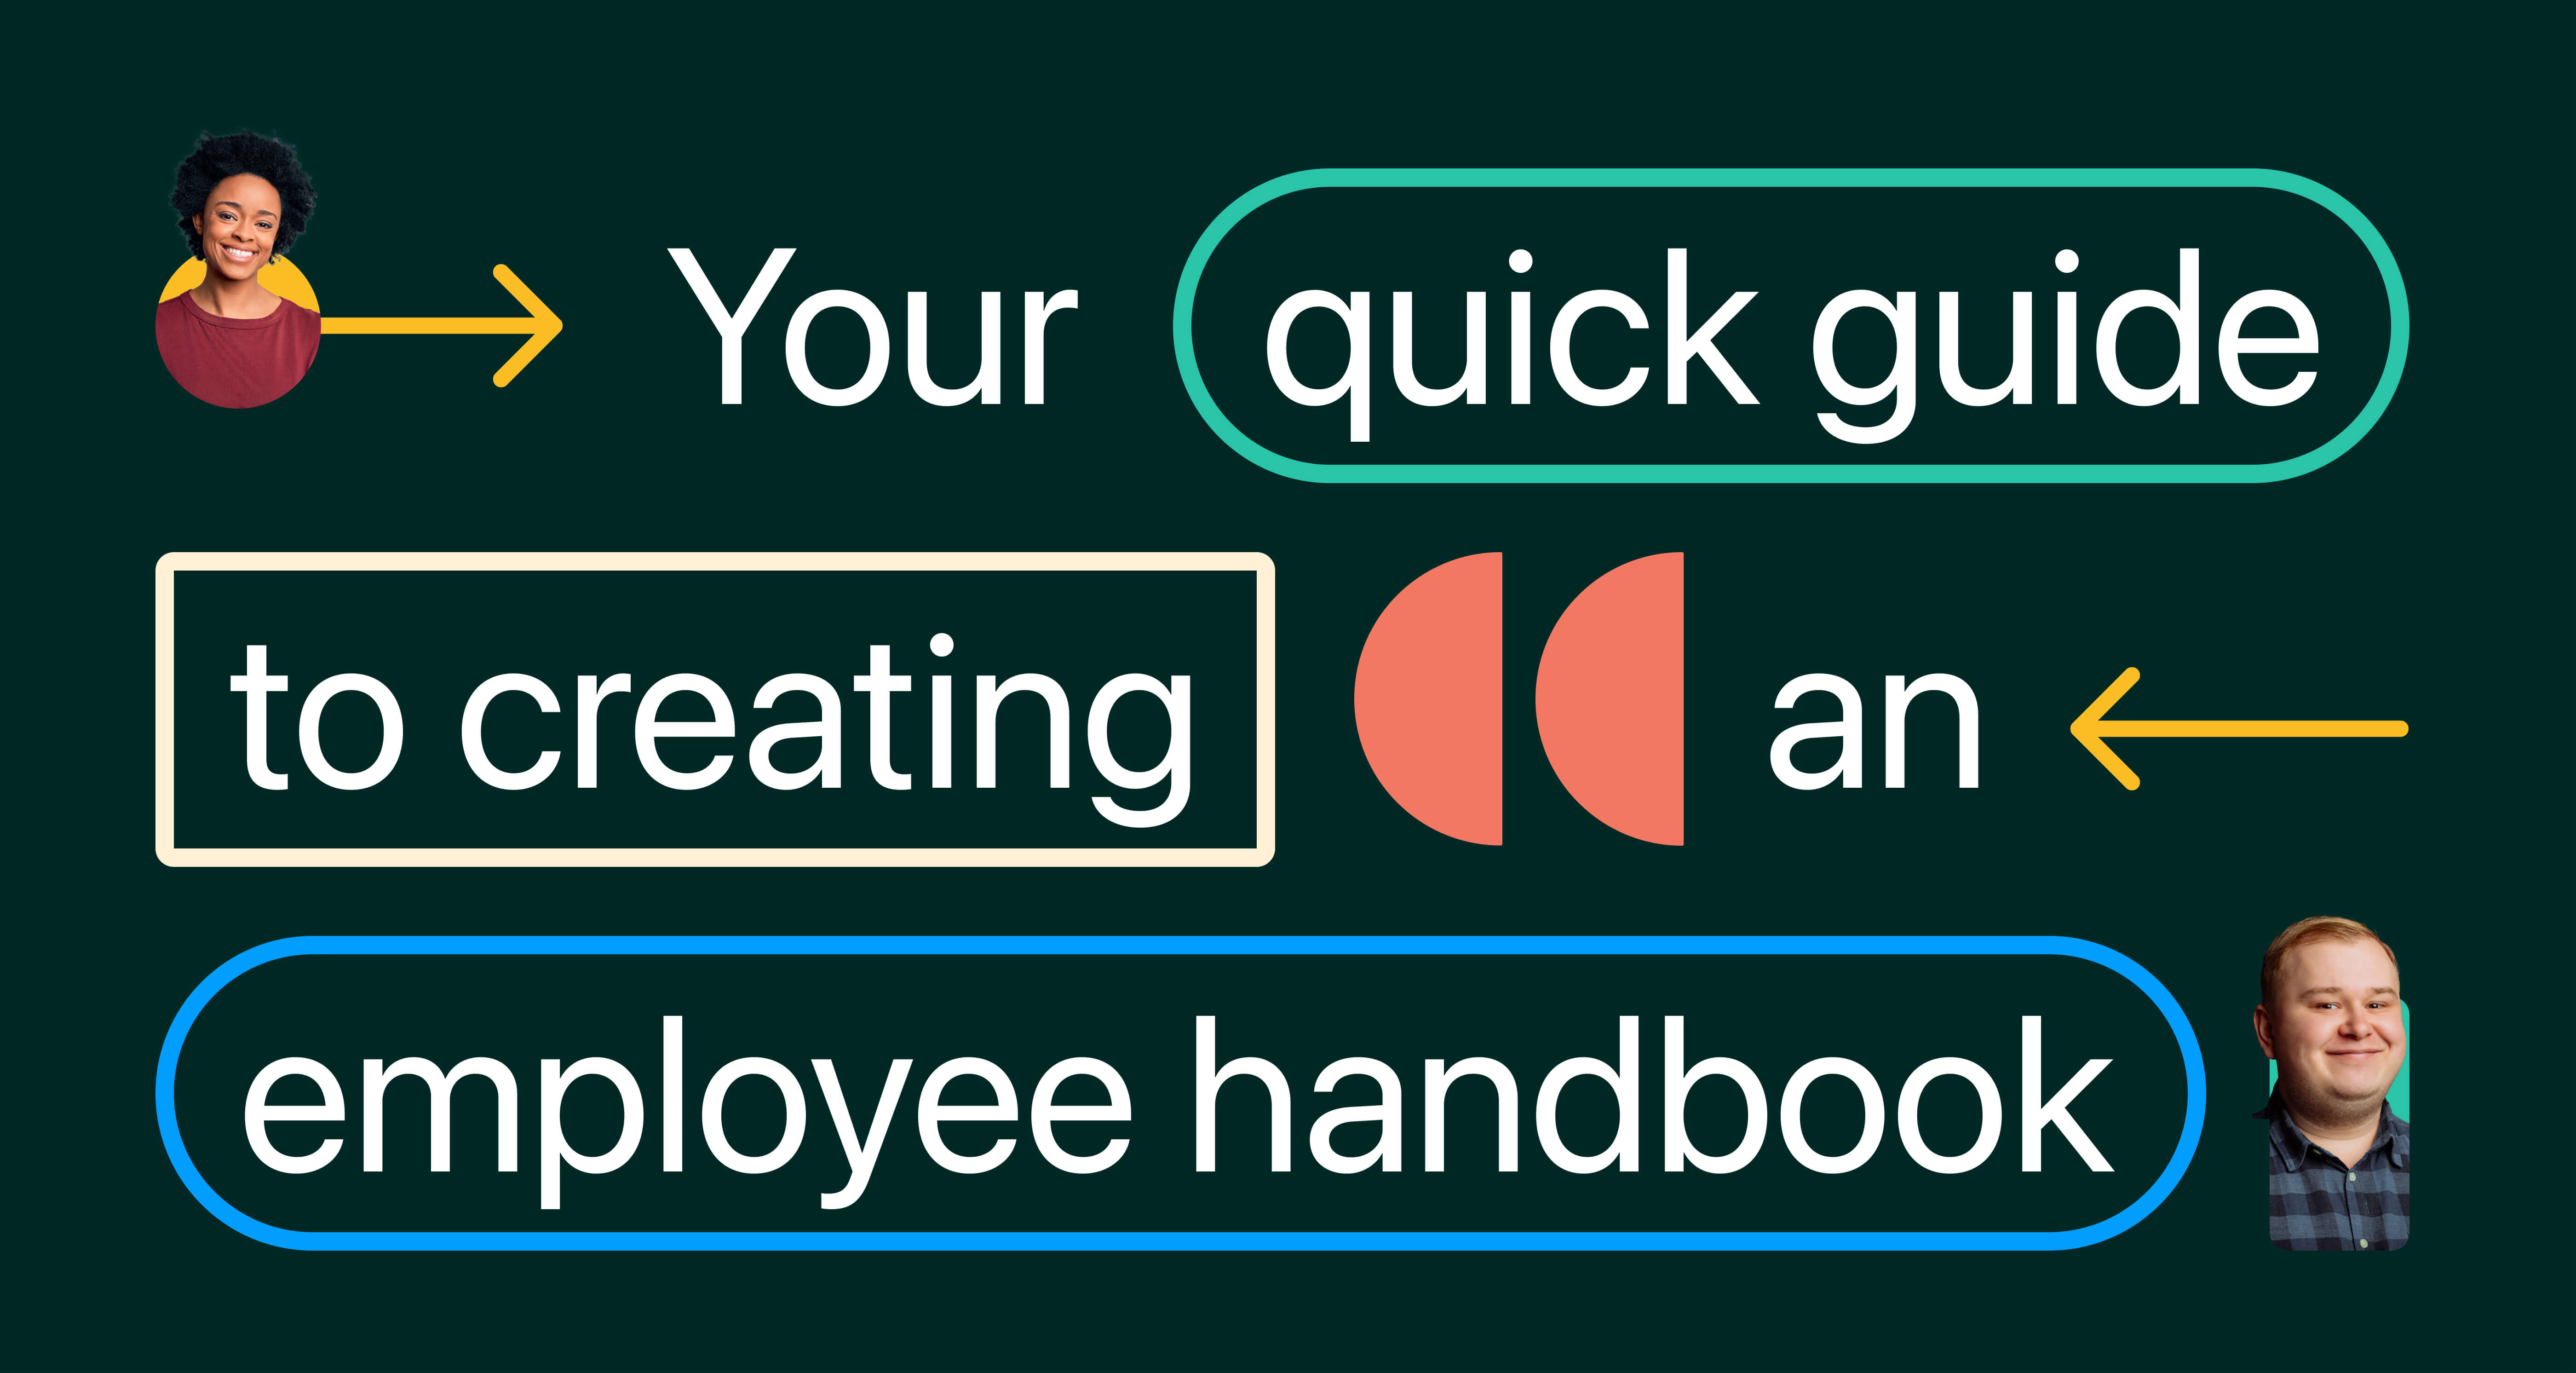 Your quick guide to creating an employee handbook [incl. template]